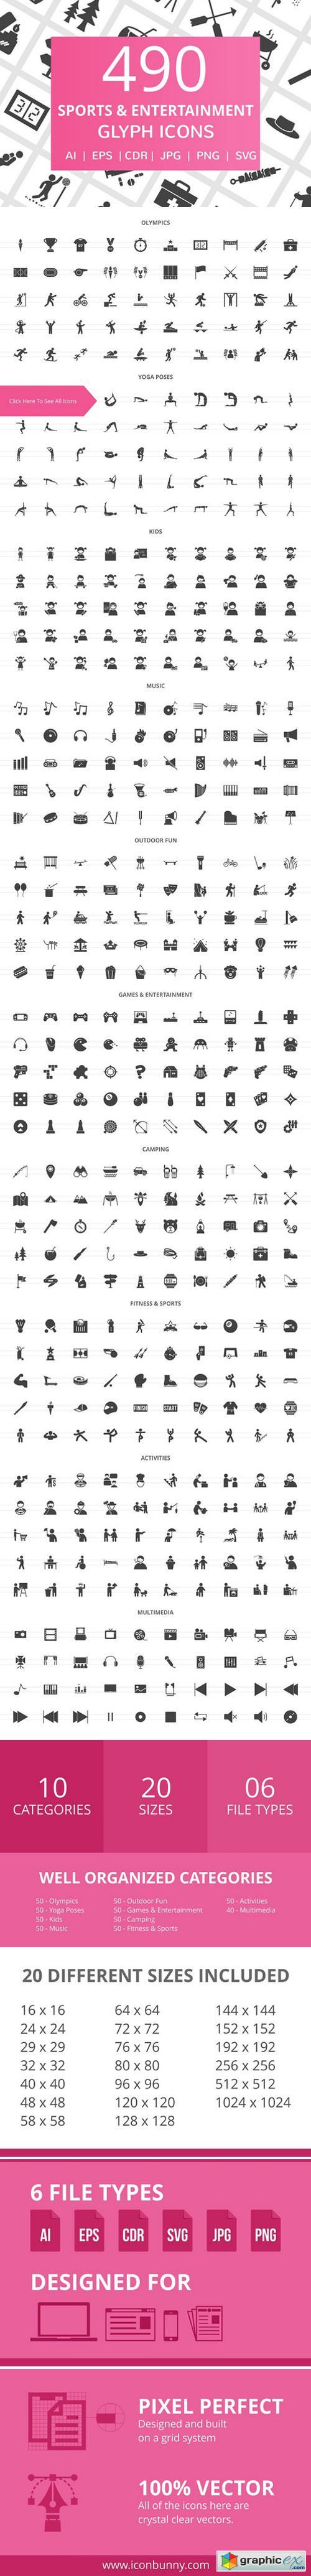 490 Sports Glyph Icons